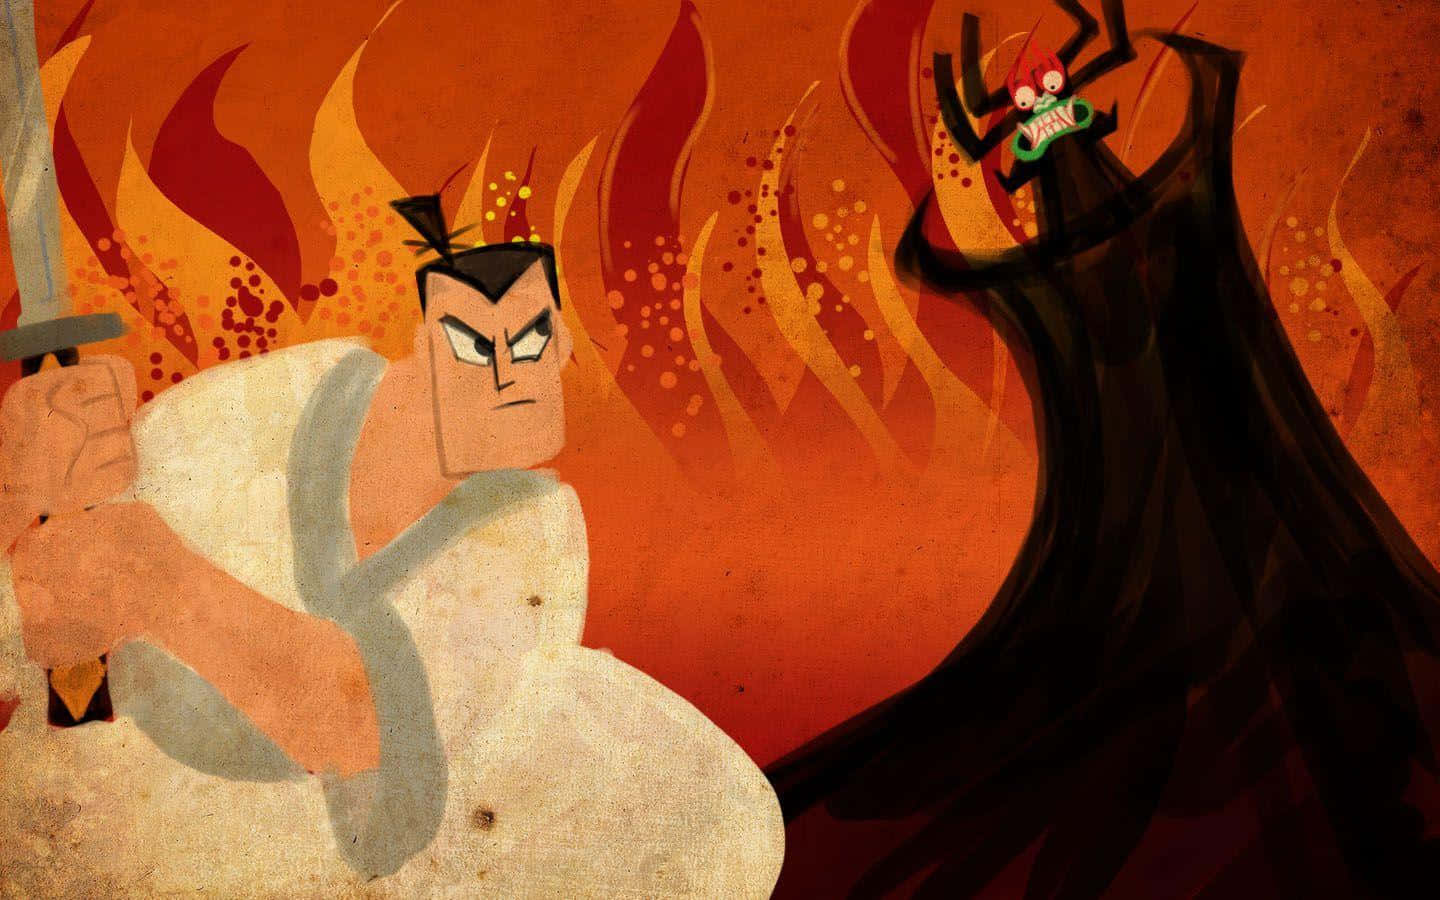 Samurai Jack in Action on a Vibrant and Dynamic Background